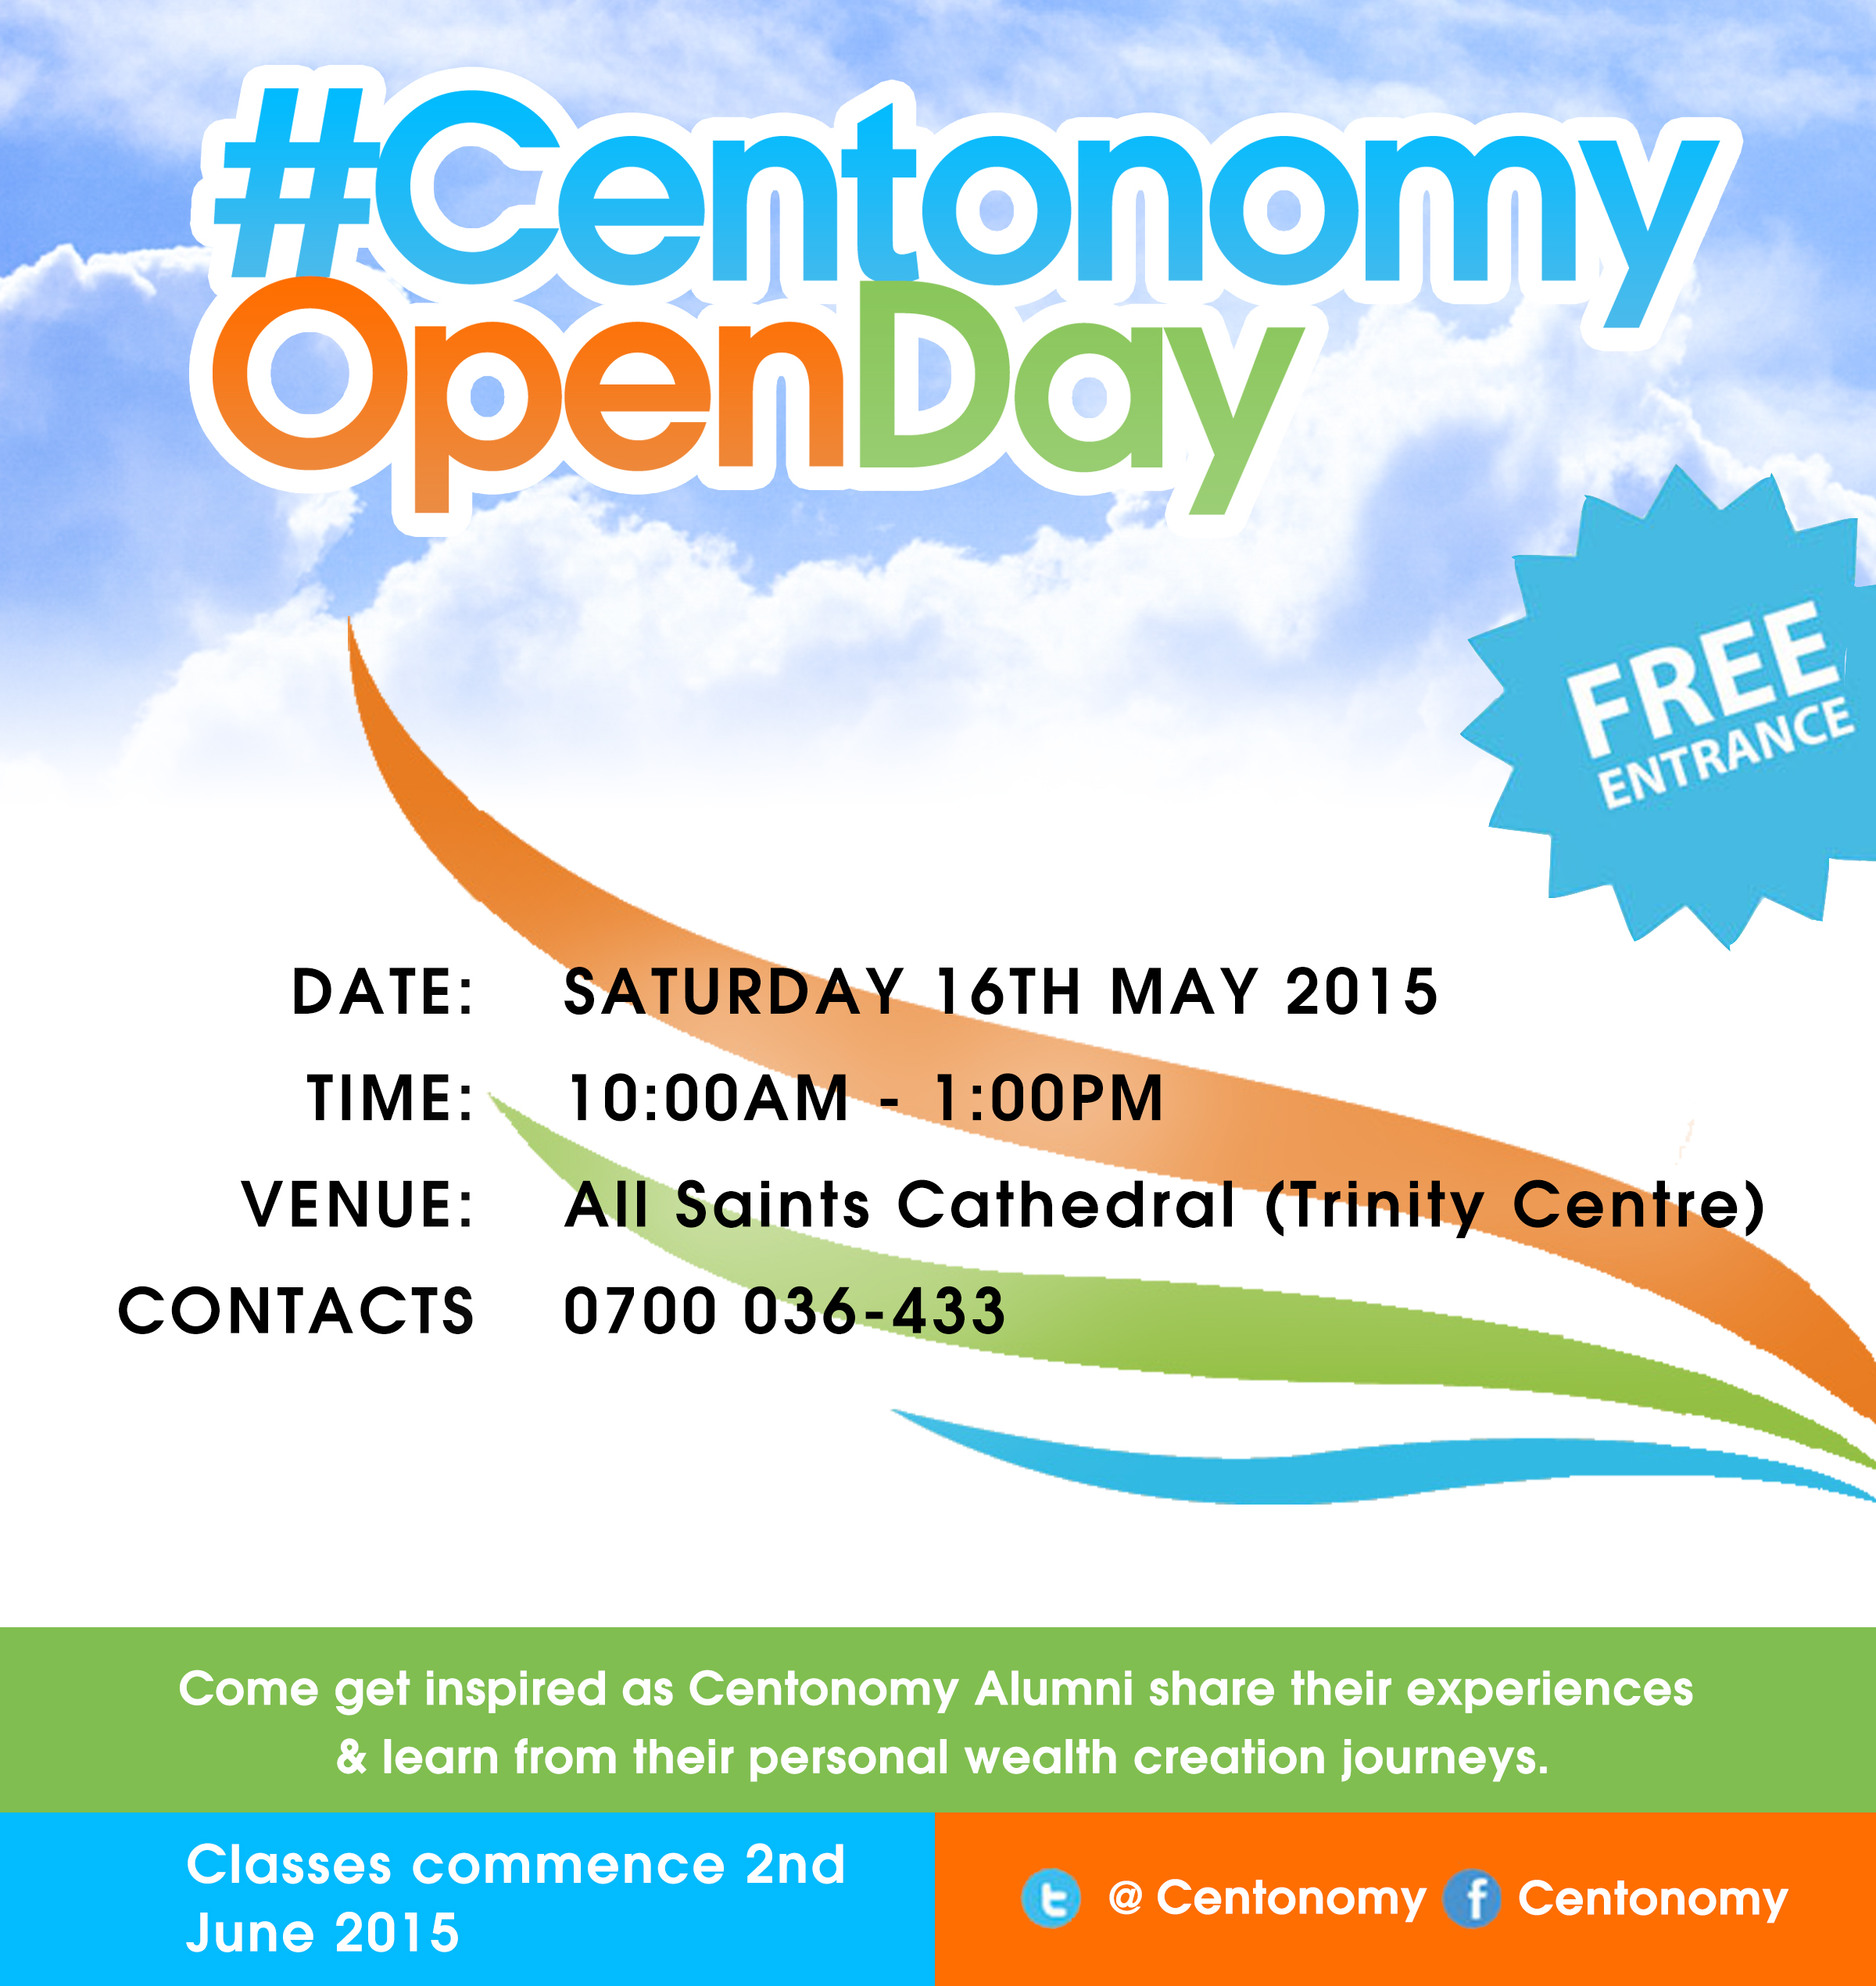 The Open Day May 16th 2015